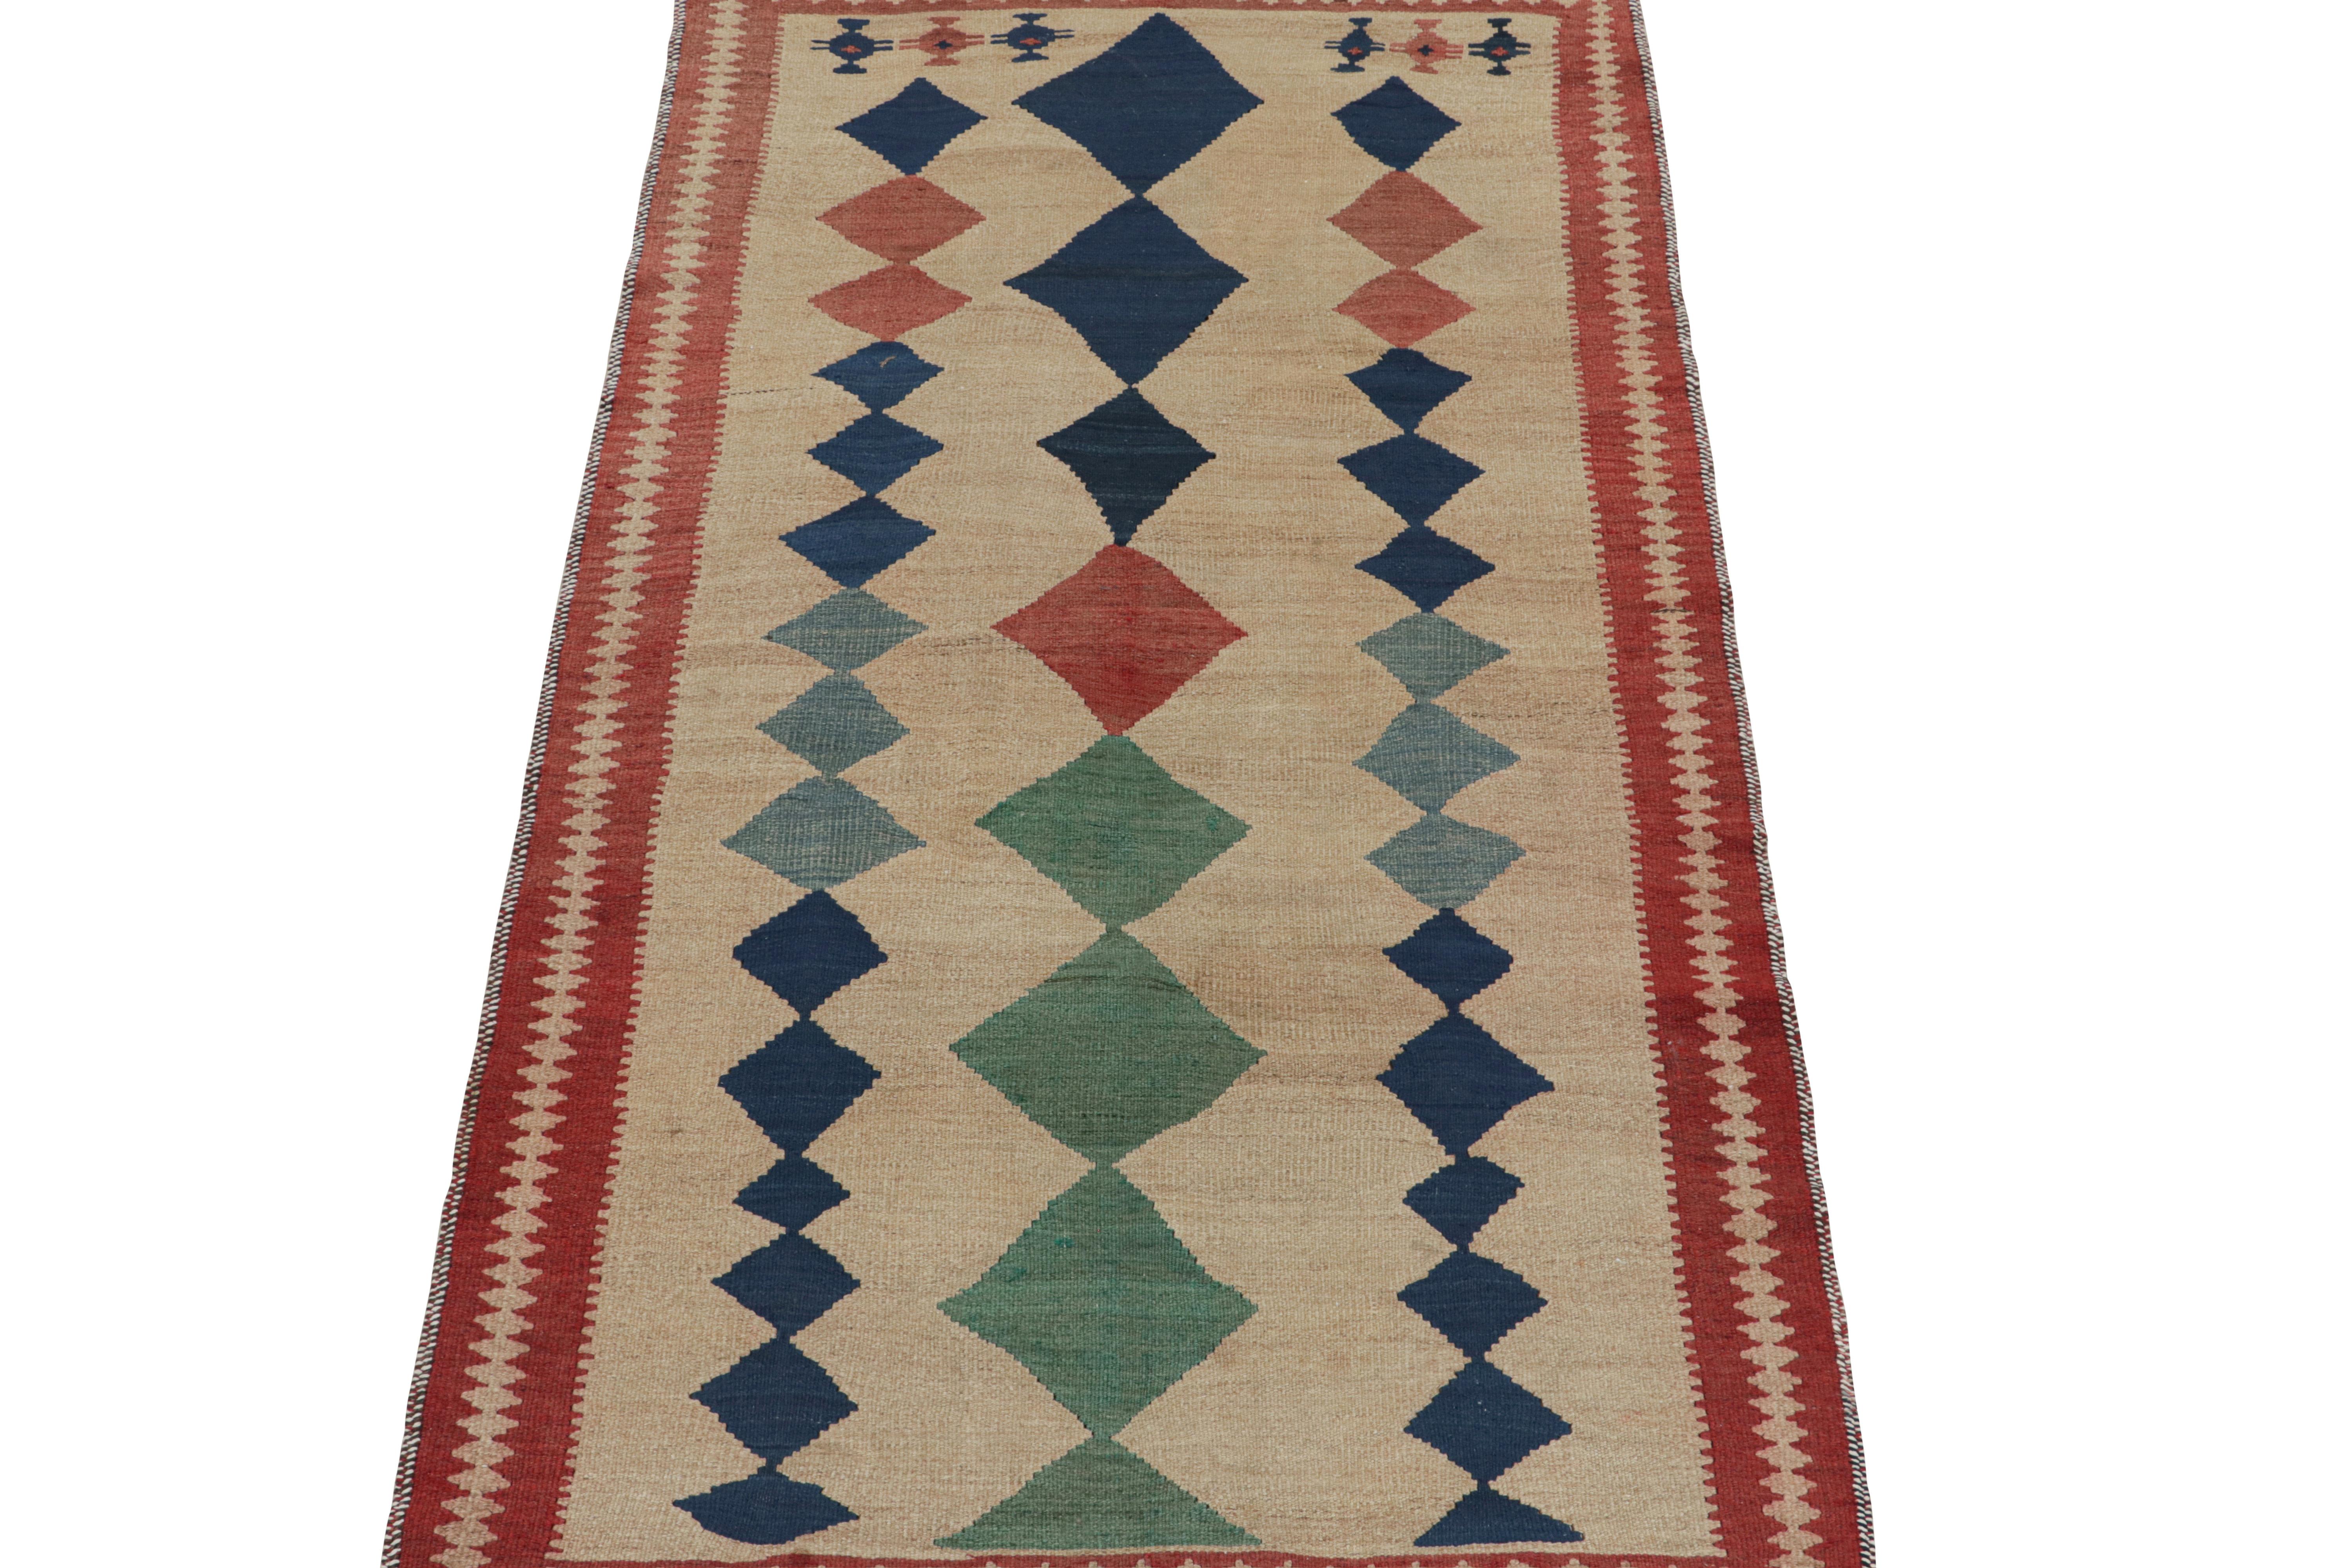 This vintage 4x8 Persian kilim is believed to be a Shahsavan tribal rug.

Handwoven in wool circa 1950-1960, its design favors a beige field with red, navy blue and teal diamond patterns. Keen eyes may further admire other motifs in the lower